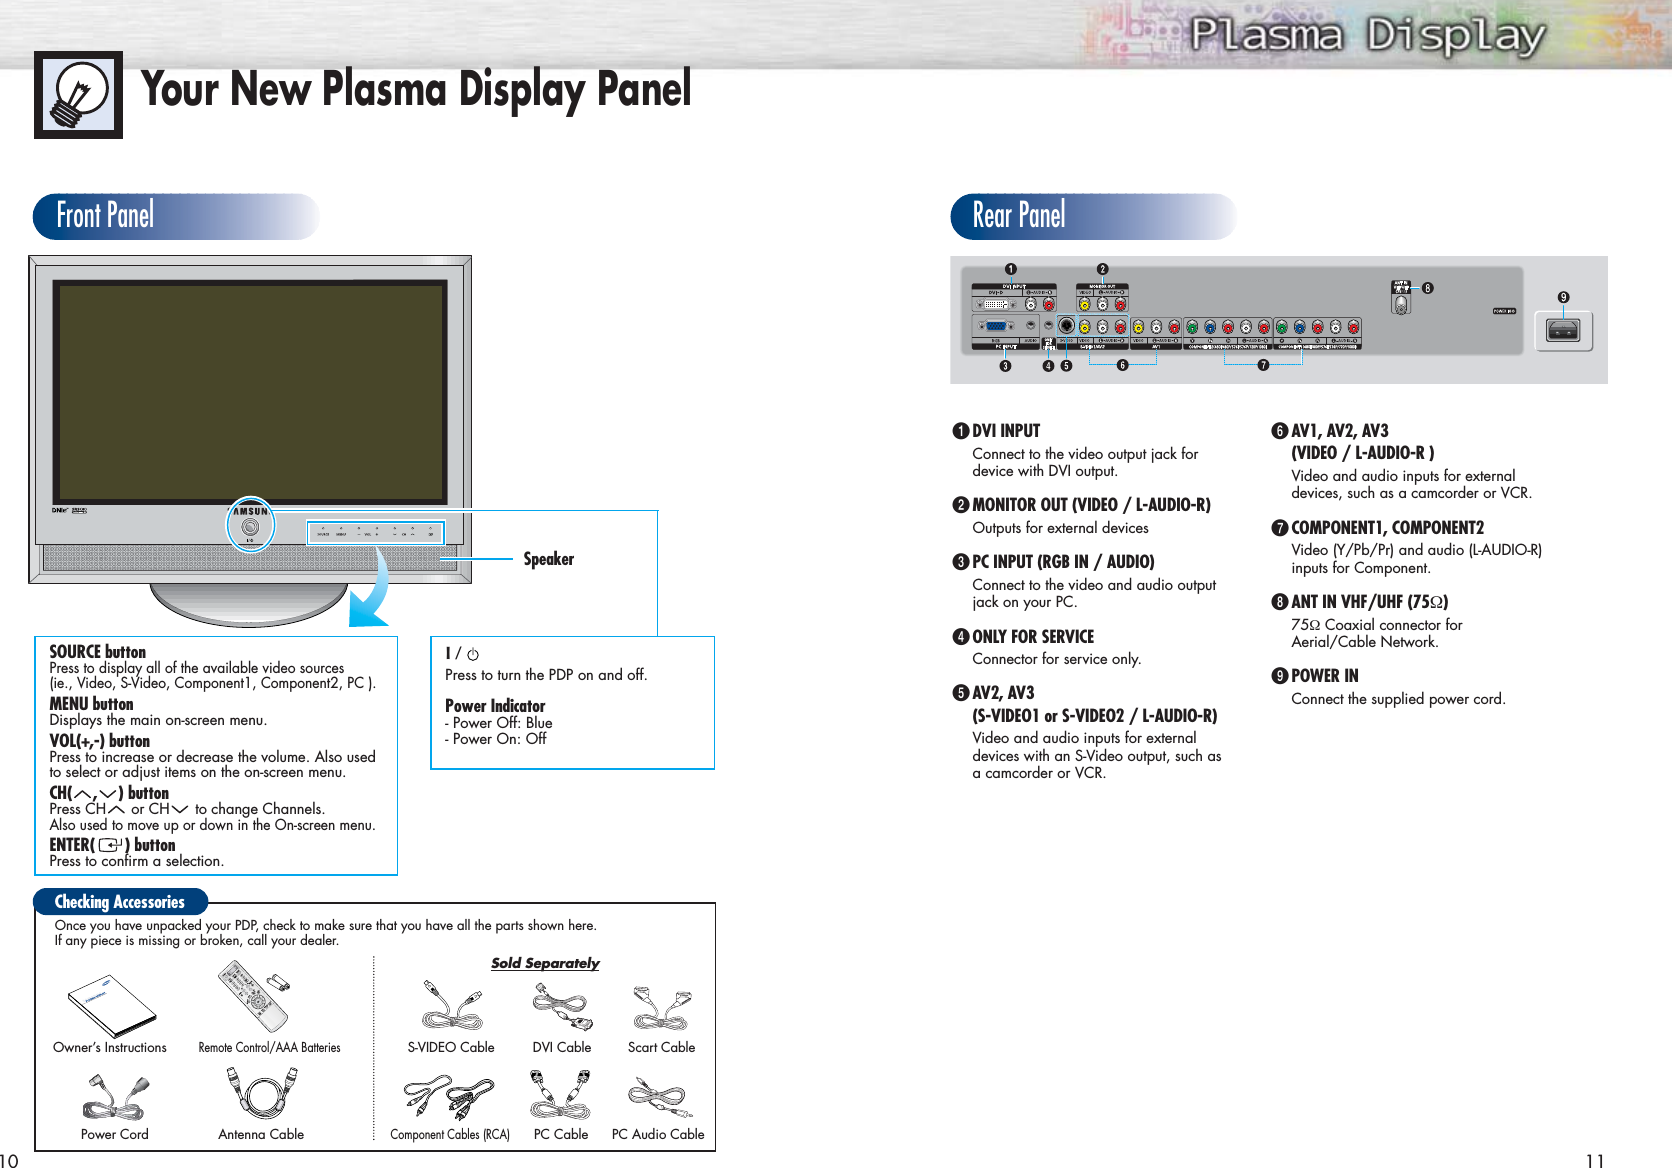 Front PanelYour New Plasma Display Panel10 11Checking AccessoriesOwner’s InstructionsOnce you have unpacked your PDP, check to make sure that you have all the parts shown here.If any piece is missing or broken, call your dealer. Remote Control/AAA BatteriesPower Cord Antenna CableS-VIDEO CablePC CableDVI Cable Scart CablePC Audio CableComponent Cables (RCA)Sold SeparatelyRear PanelŒDVI INPUTConnect to the video output jack for device with DVI output.´MONITOR OUT (VIDEO / L-AUDIO-R)Outputs for external devicesˇPC INPUT (RGB IN / AUDIO)Connect to the video and audio output jack on your PC. ¨ONLY FOR SERVICEConnector for service only.ˆAV2, AV3 (S-VIDEO1 or S-VIDEO2 / L-AUDIO-R)Video and audio inputs for external devices with an S-Video output, such as a camcorder or VCR.ØAV1, AV2, AV3  (VIDEO / L-AUDIO-R )Video and audio inputs for externaldevices, such as a camcorder or VCR.∏COMPONENT1, COMPONENT2 Video (Y/Pb/Pr) and audio (L-AUDIO-R) inputs for Component.”ANT IN VHF/UHF (75Ω)75ΩCoaxial connector for Aerial/Cable Network.’POWER INConnect the supplied power cord.SOURCE buttonPress to display all of the available video sources (ie., Video, S-Video, Component1, Component2, PC ).MENU buttonDisplays the main on-screen menu.VOL(+,-) buttonPress to increase or decrease the volume. Also usedto select or adjust items on the on-screen menu.  CH( , ) buttonPress CH or CH to change Channels. Also used to move up or down in the On-screen menu.ENTER( ) buttonPress to confirm a selection. I/Press to turn the PDP on and off.Power Indicator- Power Off: Blue- Power On: OffSpeaker